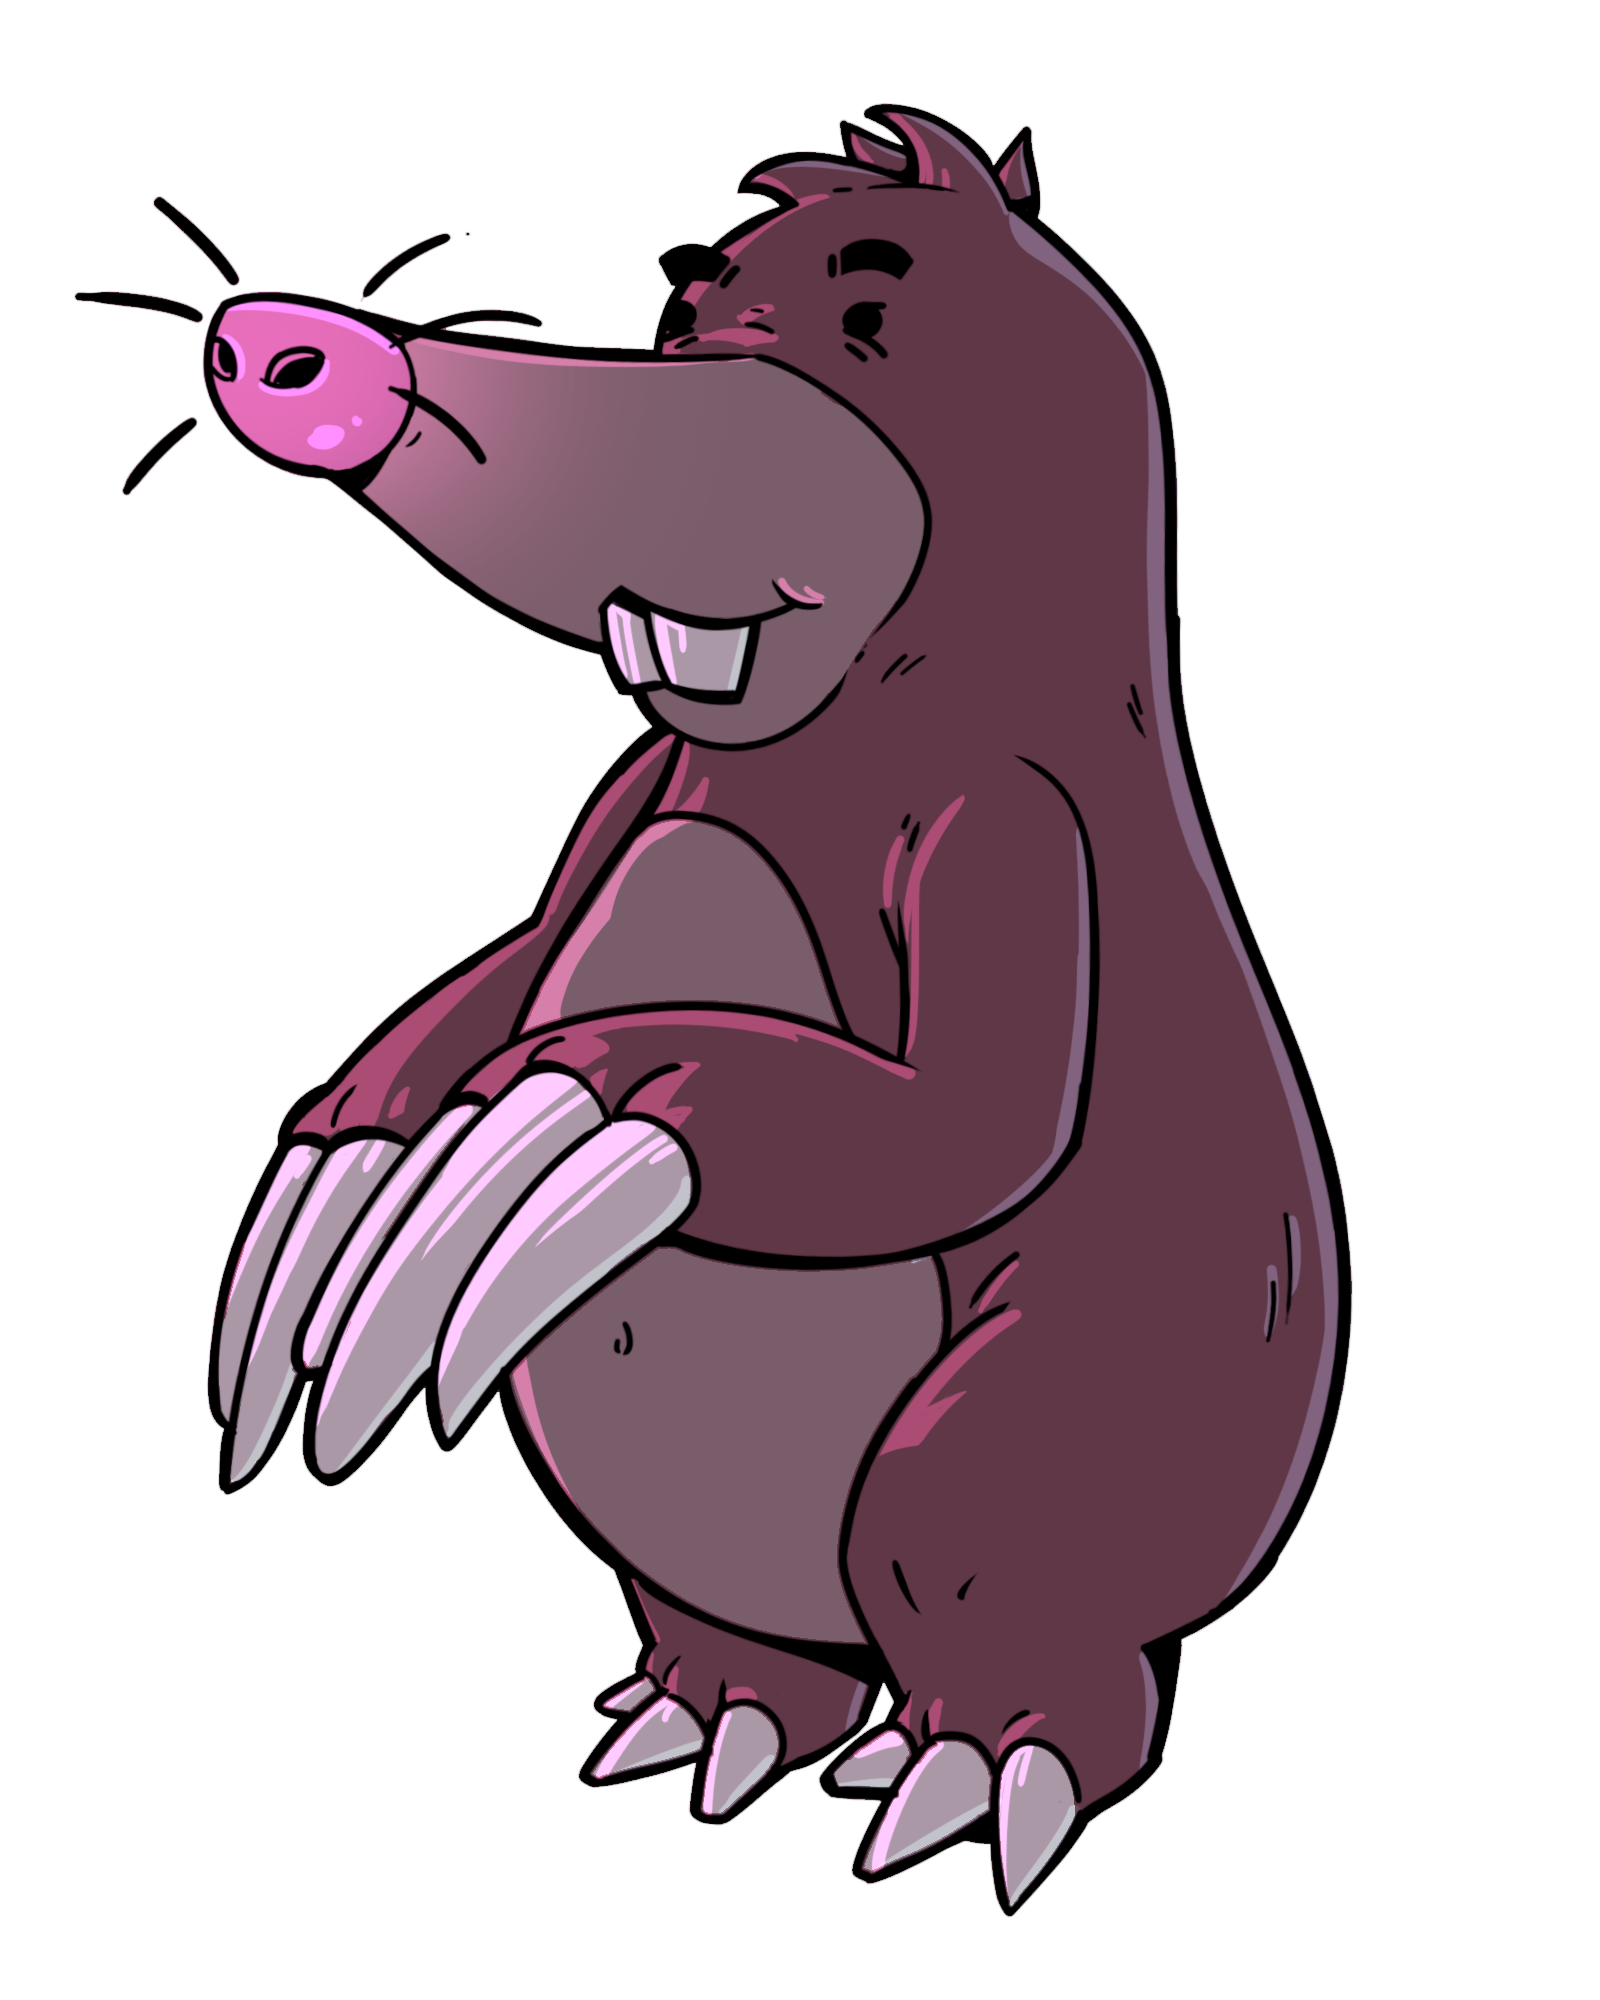 Artist Samuel Azeredo - Angler Mole: A cute, cartoonish mole with a glowing nose and long front claws poses pleasantly.